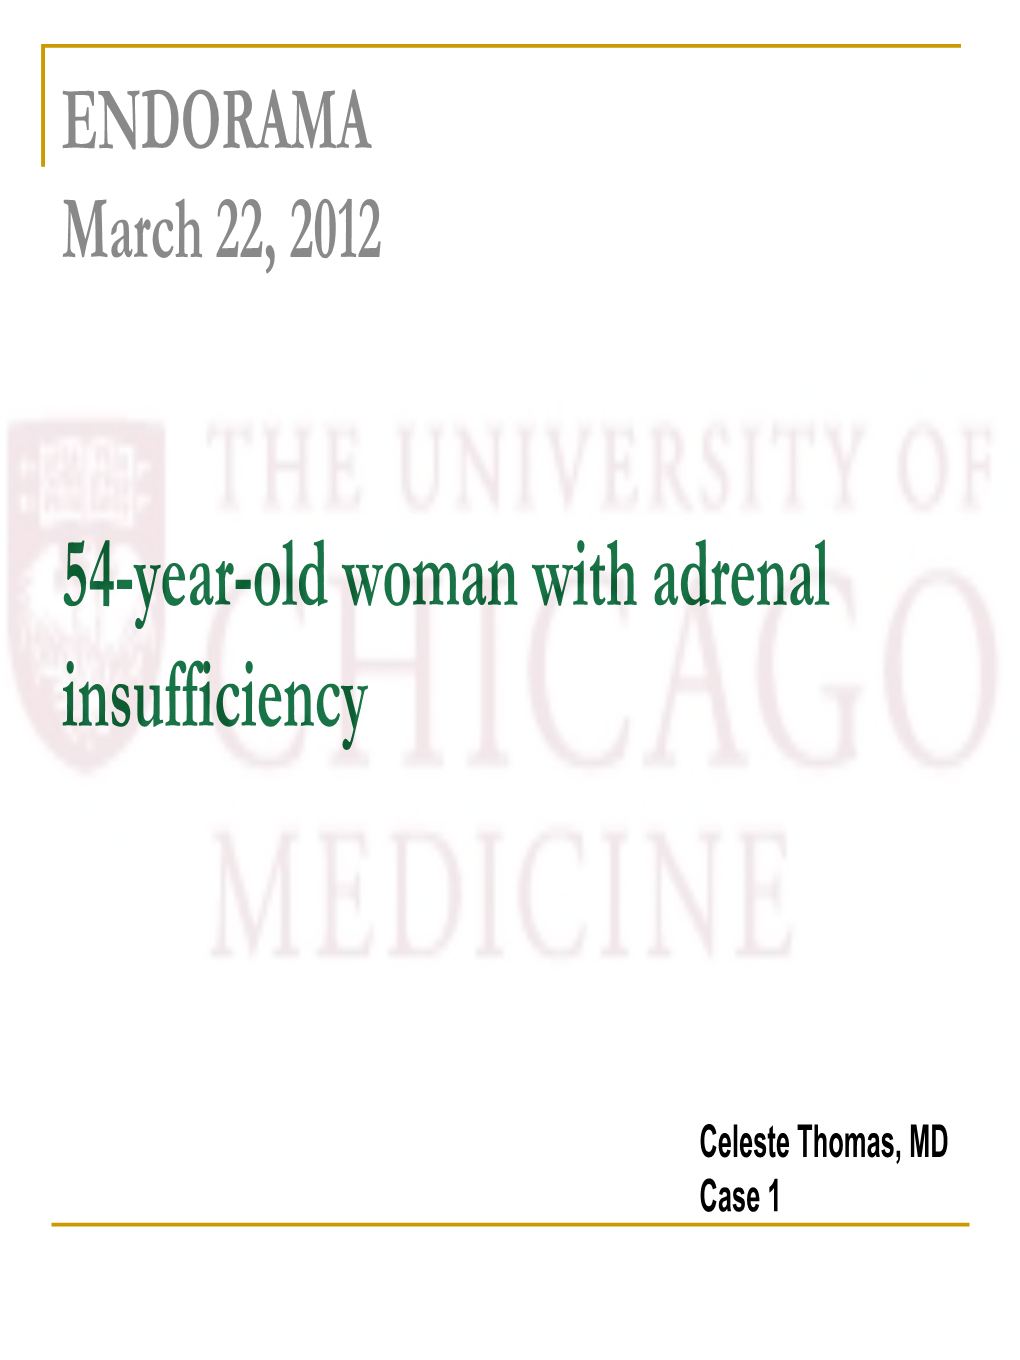 Case 1: 54-Year-Old Woman with Adrenal Insufficiency